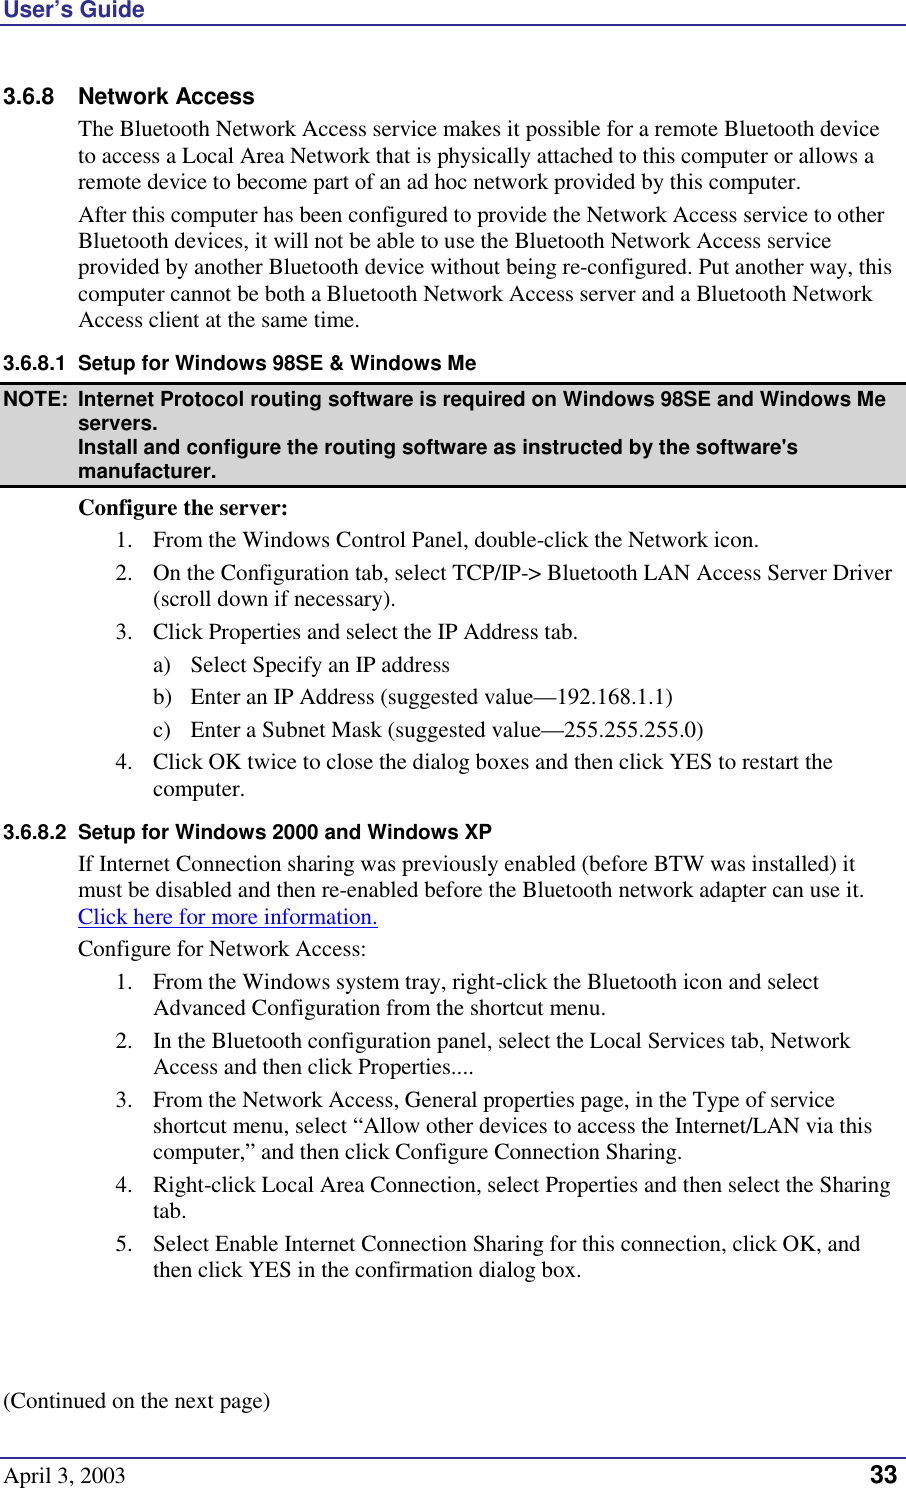 User’s Guide April 3, 2003   33 3.6.8 Network Access The Bluetooth Network Access service makes it possible for a remote Bluetooth device to access a Local Area Network that is physically attached to this computer or allows a remote device to become part of an ad hoc network provided by this computer. After this computer has been configured to provide the Network Access service to other Bluetooth devices, it will not be able to use the Bluetooth Network Access service provided by another Bluetooth device without being re-configured. Put another way, this computer cannot be both a Bluetooth Network Access server and a Bluetooth Network Access client at the same time. 3.6.8.1  Setup for Windows 98SE &amp; Windows Me NOTE:  Internet Protocol routing software is required on Windows 98SE and Windows Me servers. Install and configure the routing software as instructed by the software&apos;s manufacturer. Configure the server: 1.  From the Windows Control Panel, double-click the Network icon. 2.  On the Configuration tab, select TCP/IP-&gt; Bluetooth LAN Access Server Driver (scroll down if necessary). 3.  Click Properties and select the IP Address tab. a)  Select Specify an IP address b)  Enter an IP Address (suggested value—192.168.1.1) c)  Enter a Subnet Mask (suggested value—255.255.255.0) 4.  Click OK twice to close the dialog boxes and then click YES to restart the computer. 3.6.8.2  Setup for Windows 2000 and Windows XP If Internet Connection sharing was previously enabled (before BTW was installed) it must be disabled and then re-enabled before the Bluetooth network adapter can use it. Click here for more information. Configure for Network Access: 1.  From the Windows system tray, right-click the Bluetooth icon and select Advanced Configuration from the shortcut menu. 2.  In the Bluetooth configuration panel, select the Local Services tab, Network Access and then click Properties.... 3.  From the Network Access, General properties page, in the Type of service shortcut menu, select “Allow other devices to access the Internet/LAN via this computer,” and then click Configure Connection Sharing. 4.  Right-click Local Area Connection, select Properties and then select the Sharing tab. 5.  Select Enable Internet Connection Sharing for this connection, click OK, and then click YES in the confirmation dialog box.    (Continued on the next page) 